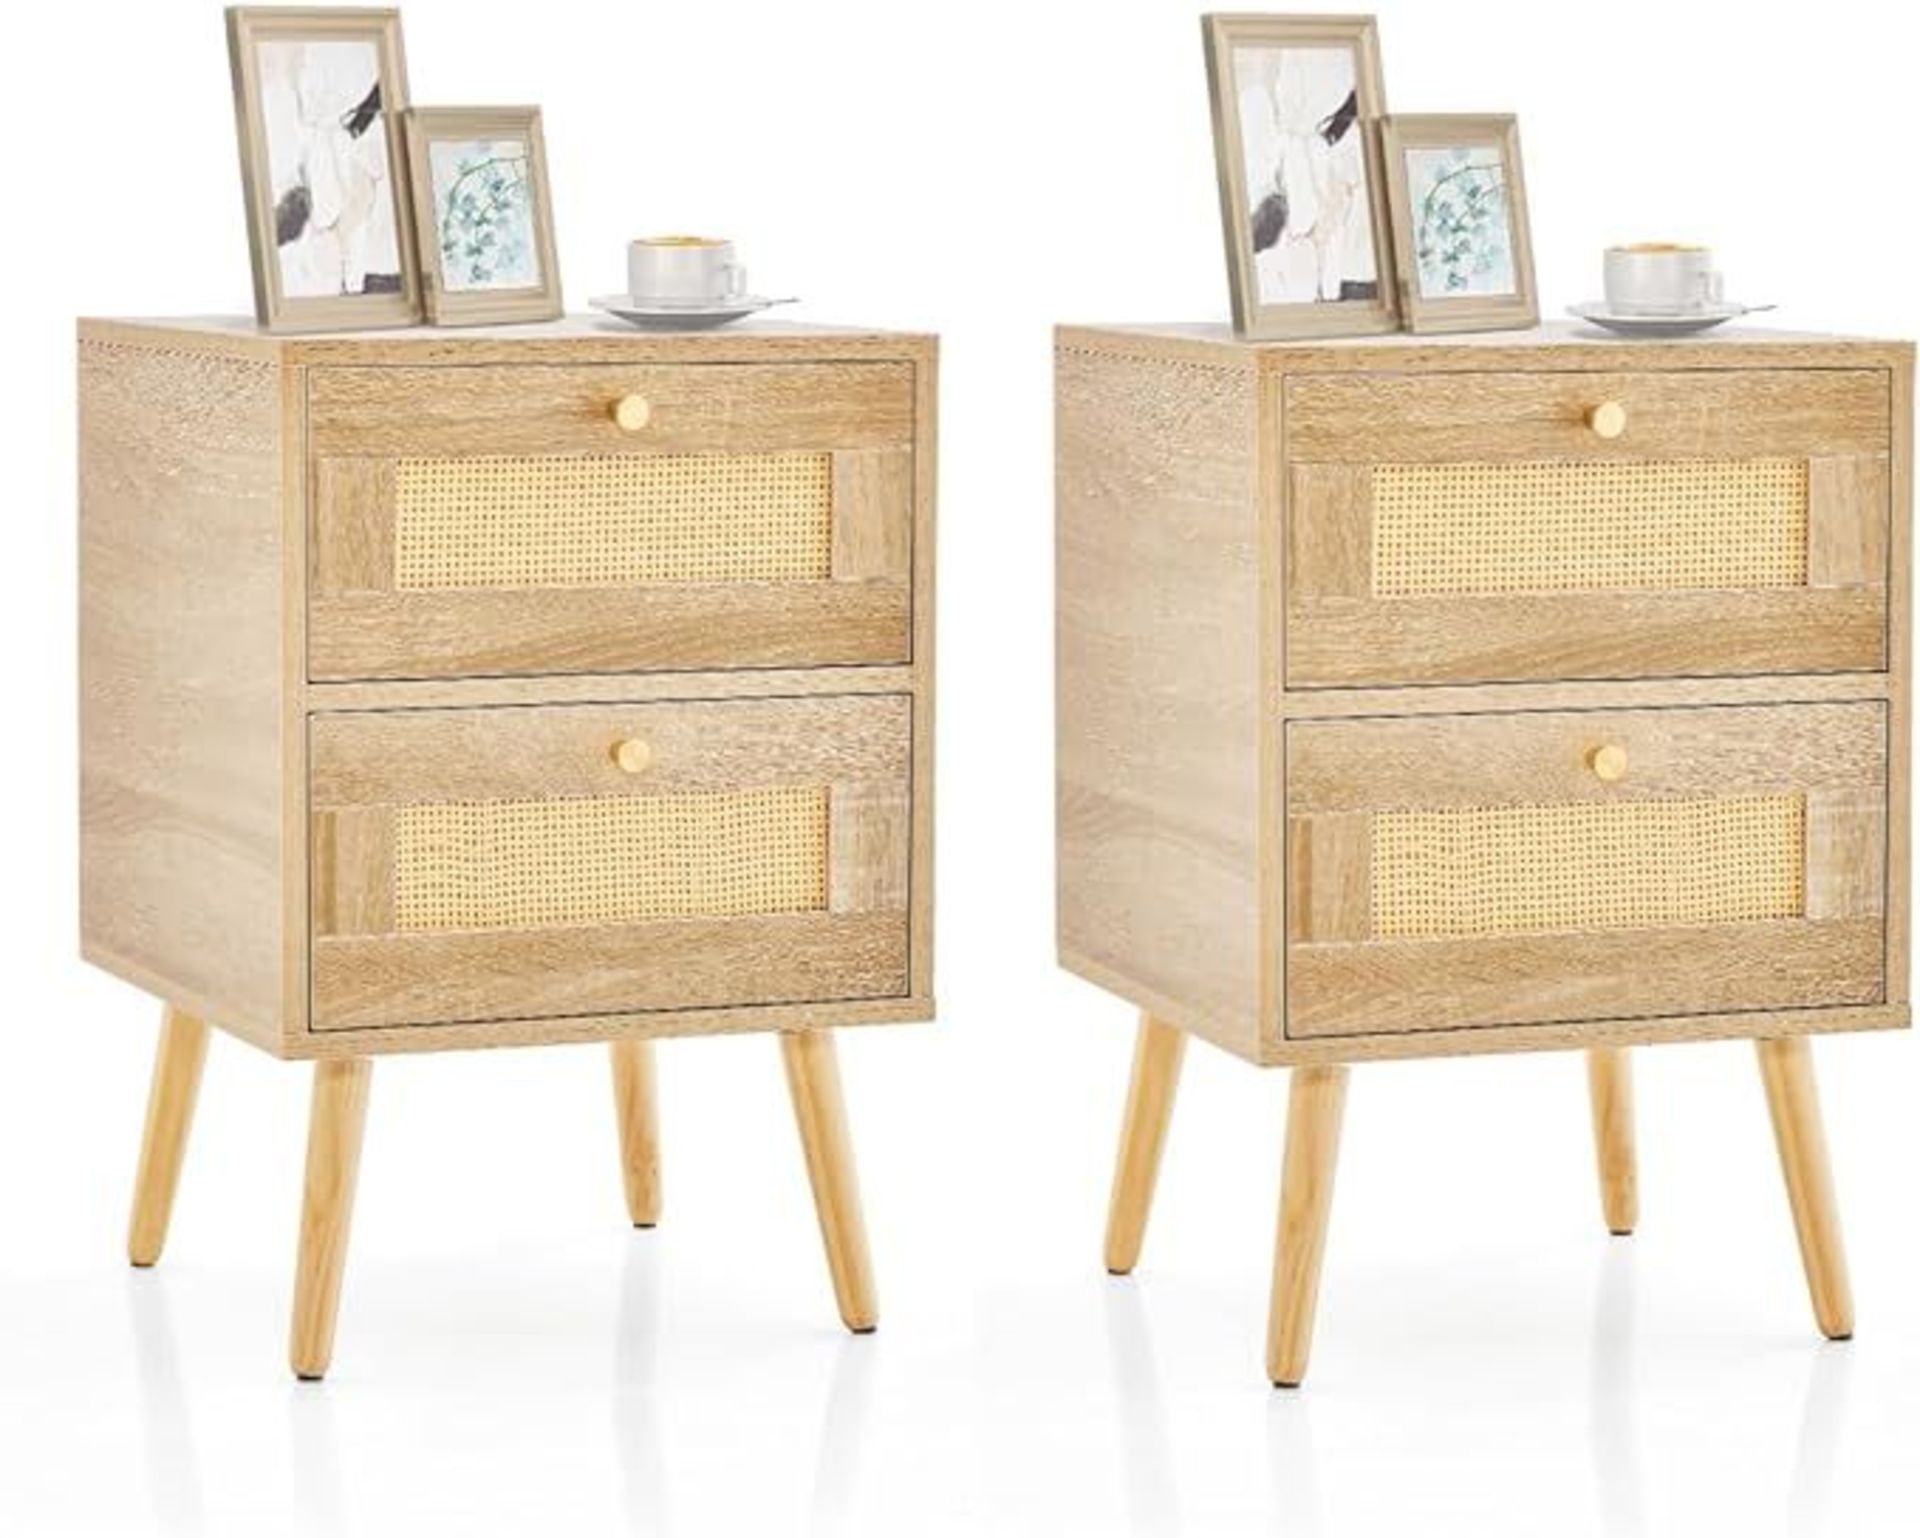 Multigot Rattan Bedside Table, Wood Nightstand End Table with Hand-woven Rattan Decoration,